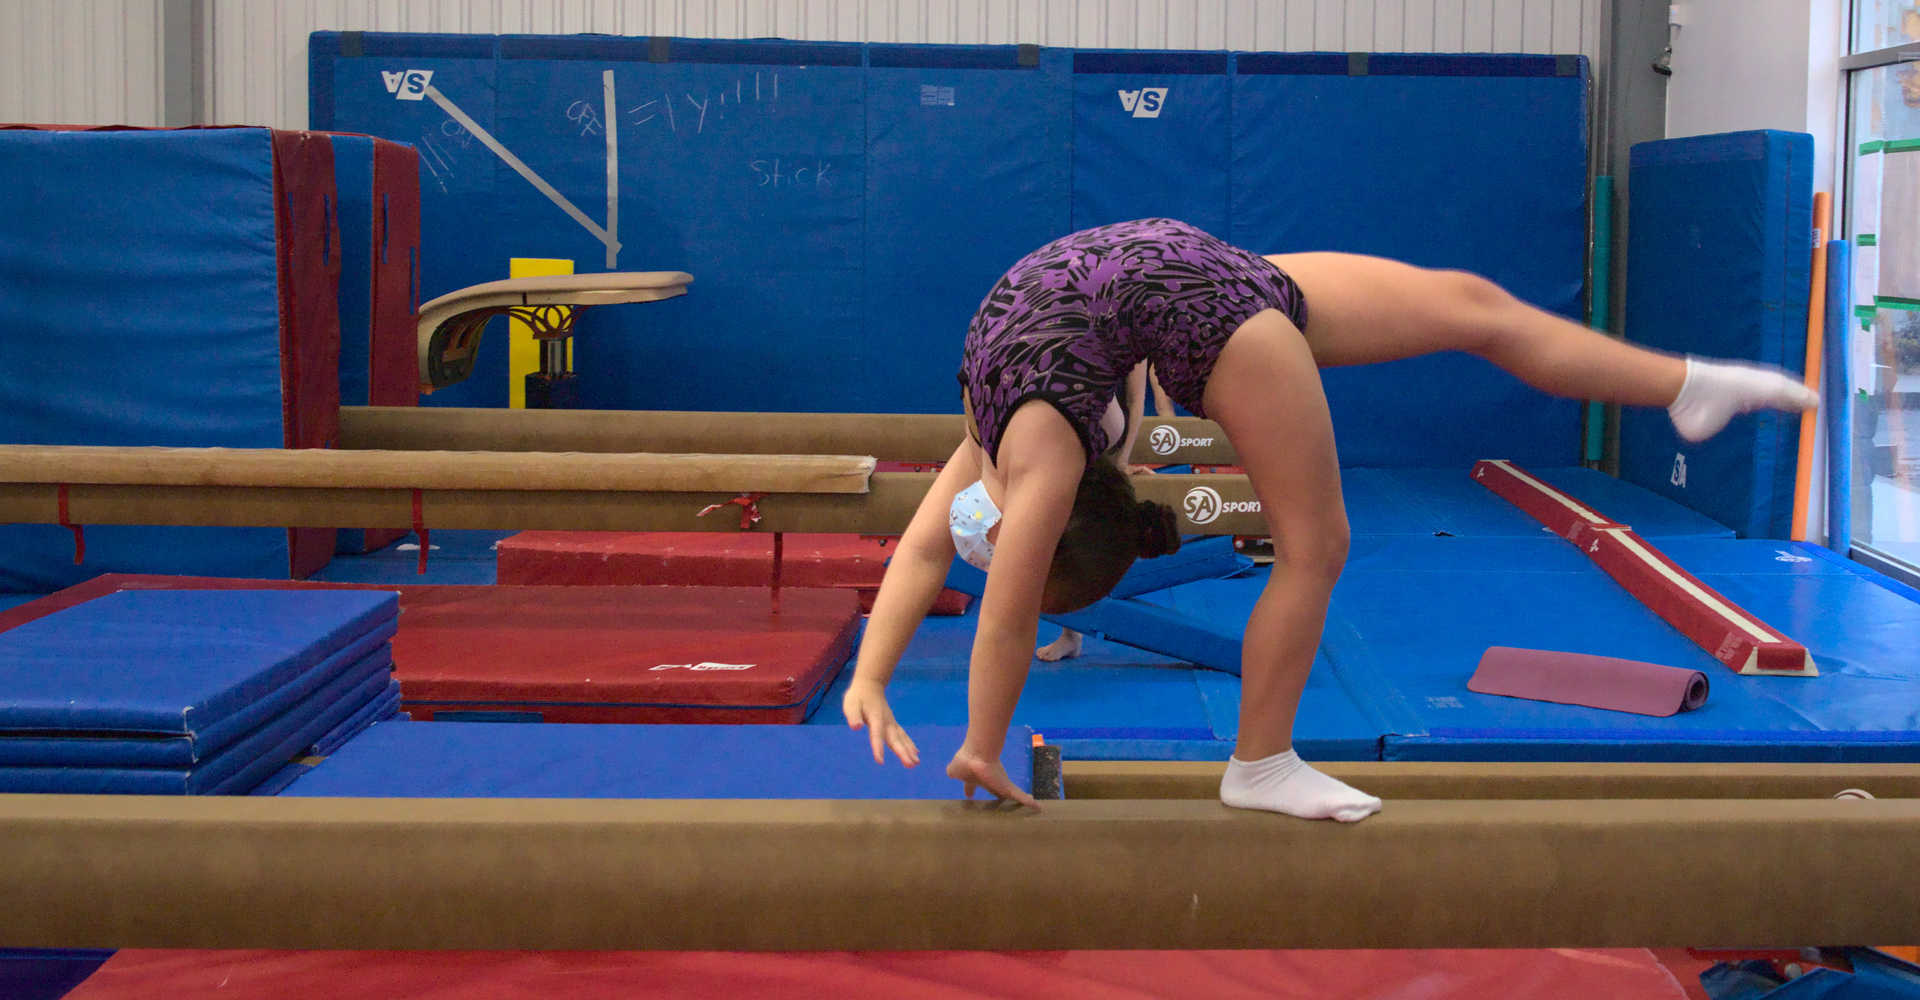 Young gymnast on a balance beam practicing a back walkover at Gymworld Adventures in Gymnastics facility in North London.